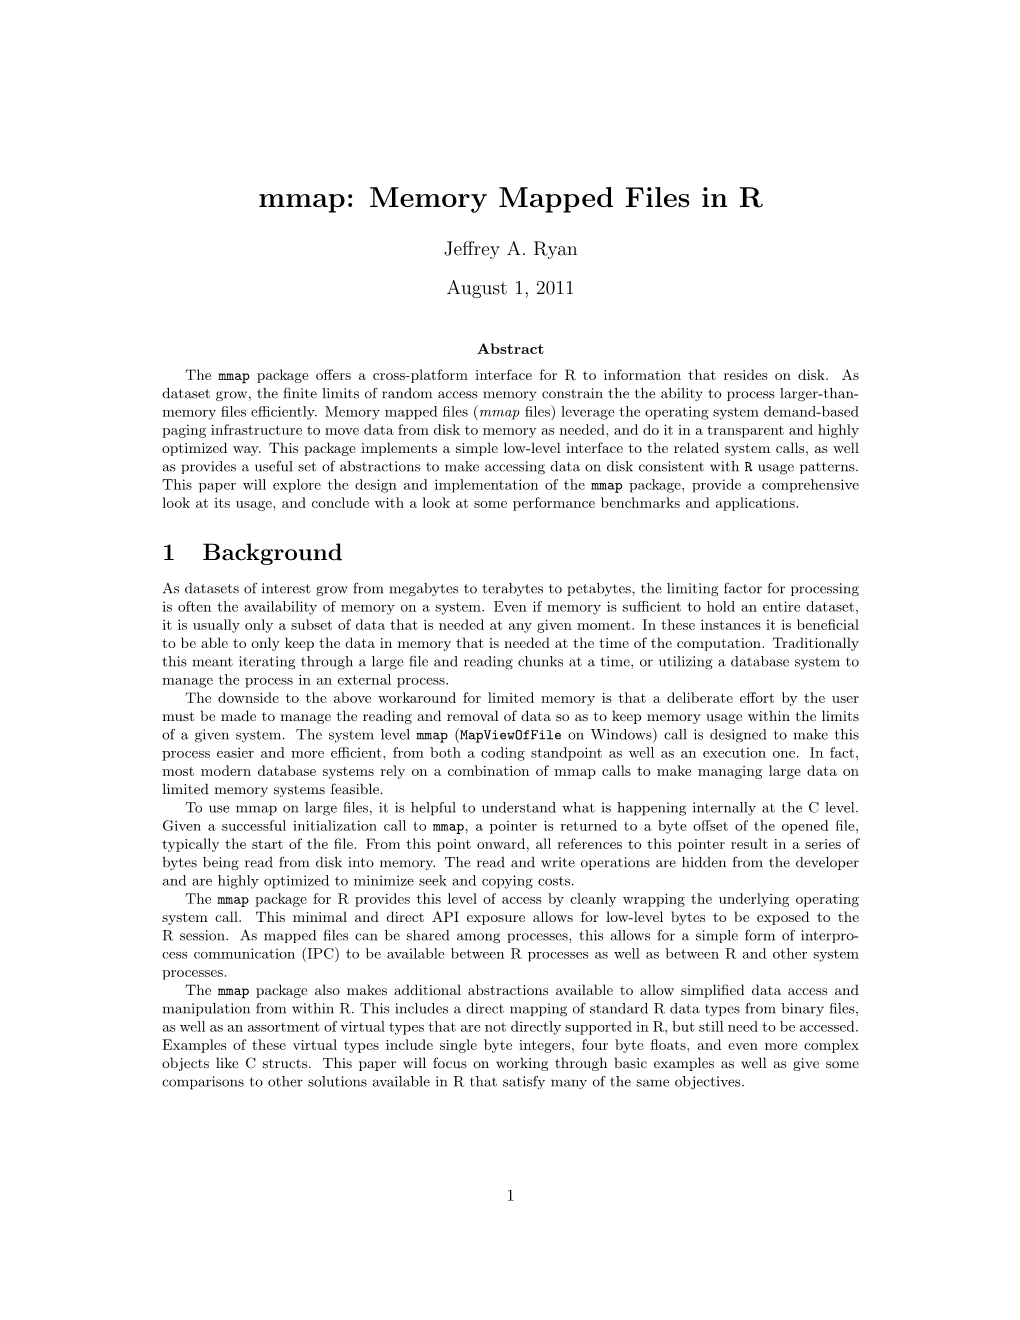 Mmap: Memory Mapped Files in R